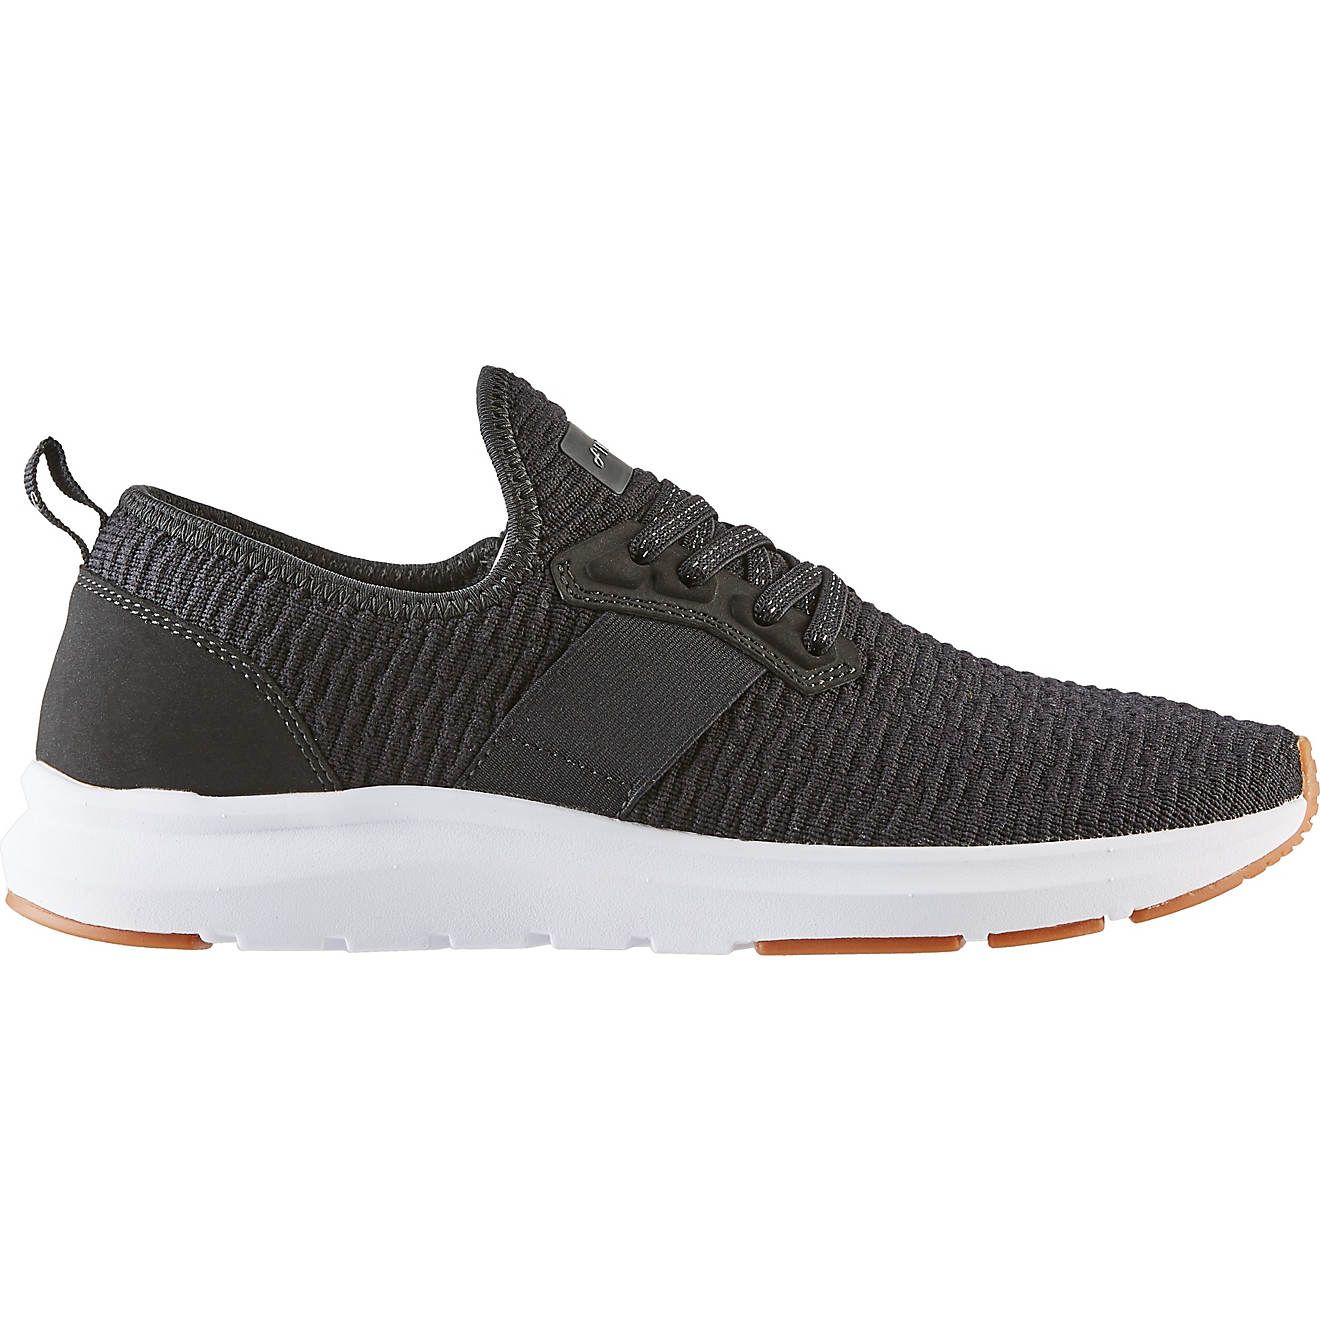 Freely Women's Lexi Slip-on Shoes | Academy | Academy Sports + Outdoors